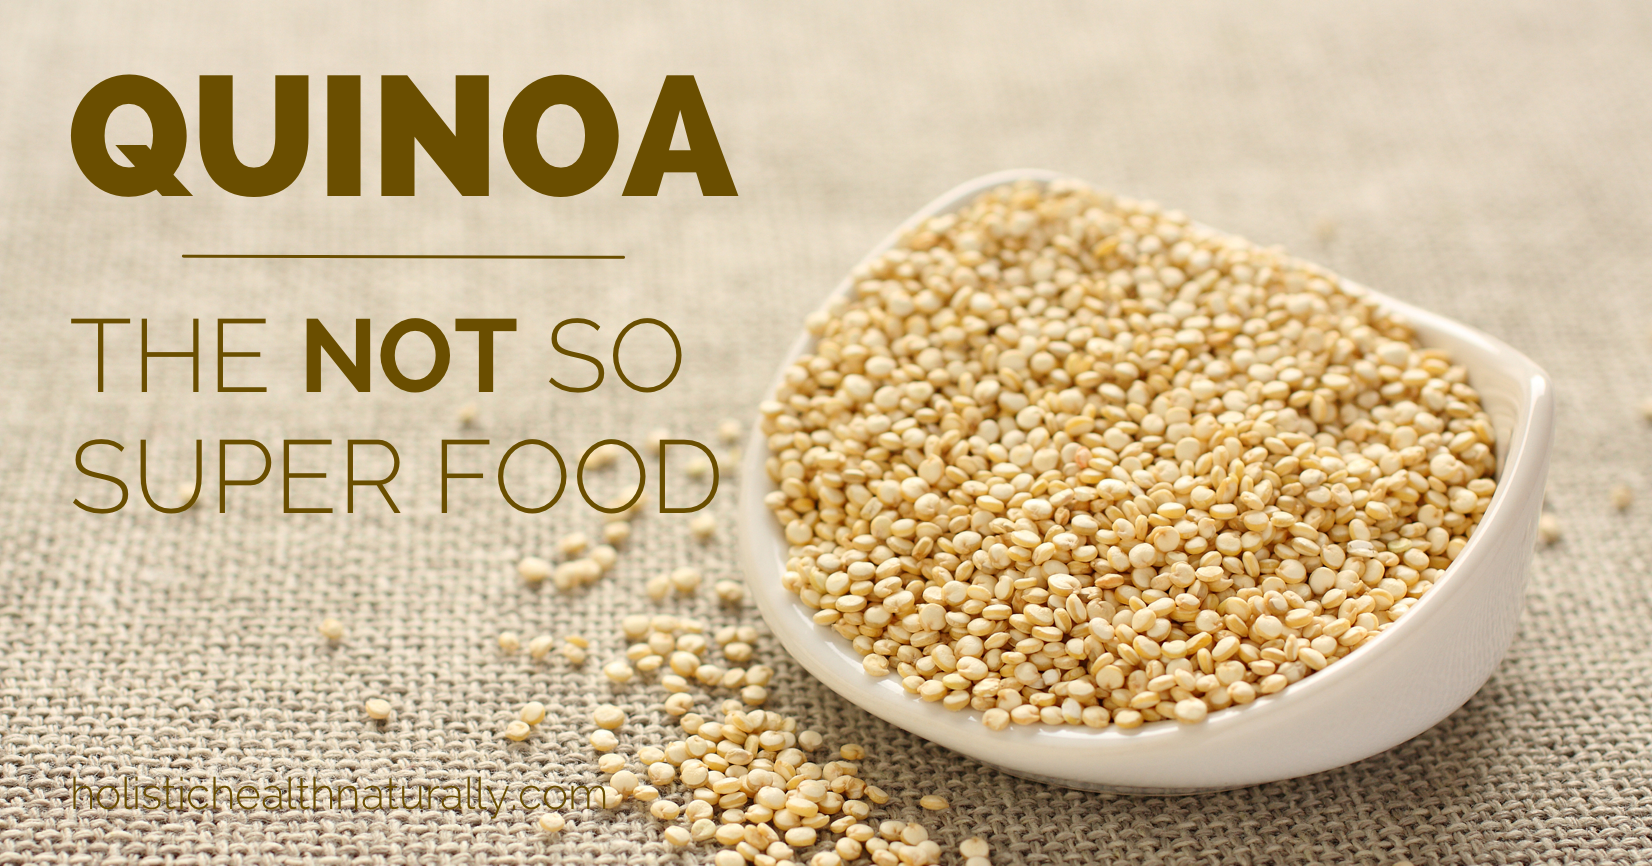 QUINOA - SMELL TEST - I AM THE SECRET INGREDIENT. WE NEED A POLYAMINE DATABASE FOR ASSESSING DIETARY INTAKE OF CHEMICAL COMPOUNDS SUCH AS SPERMINE, SPERMIDINE, AND PUTRESCINE.